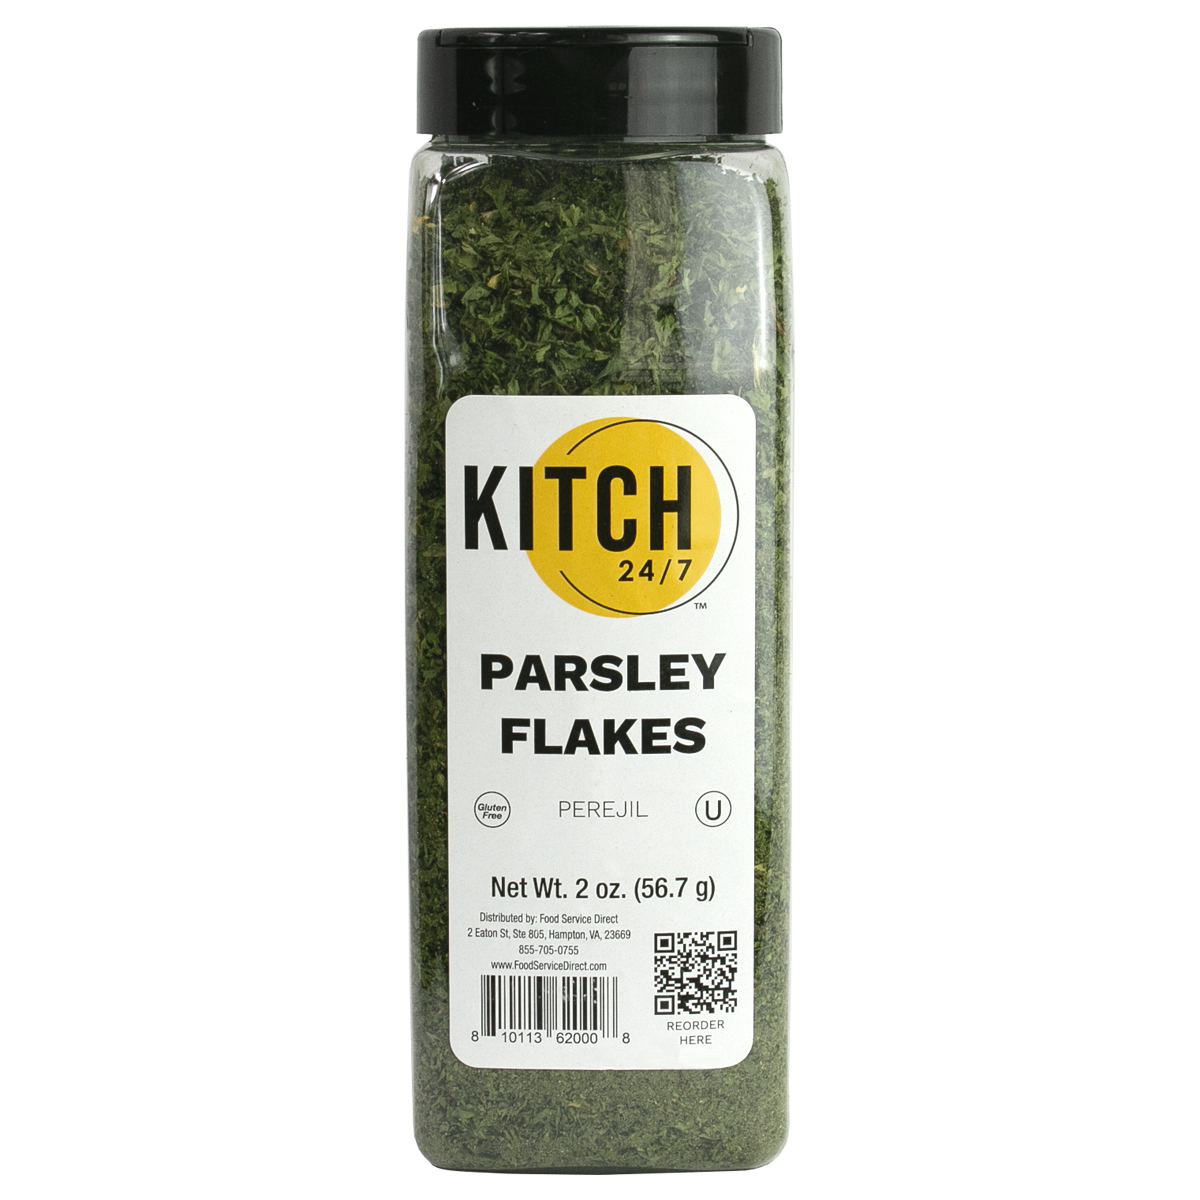 KITCH 24/7 Parsley Flakes, 2 Ounce